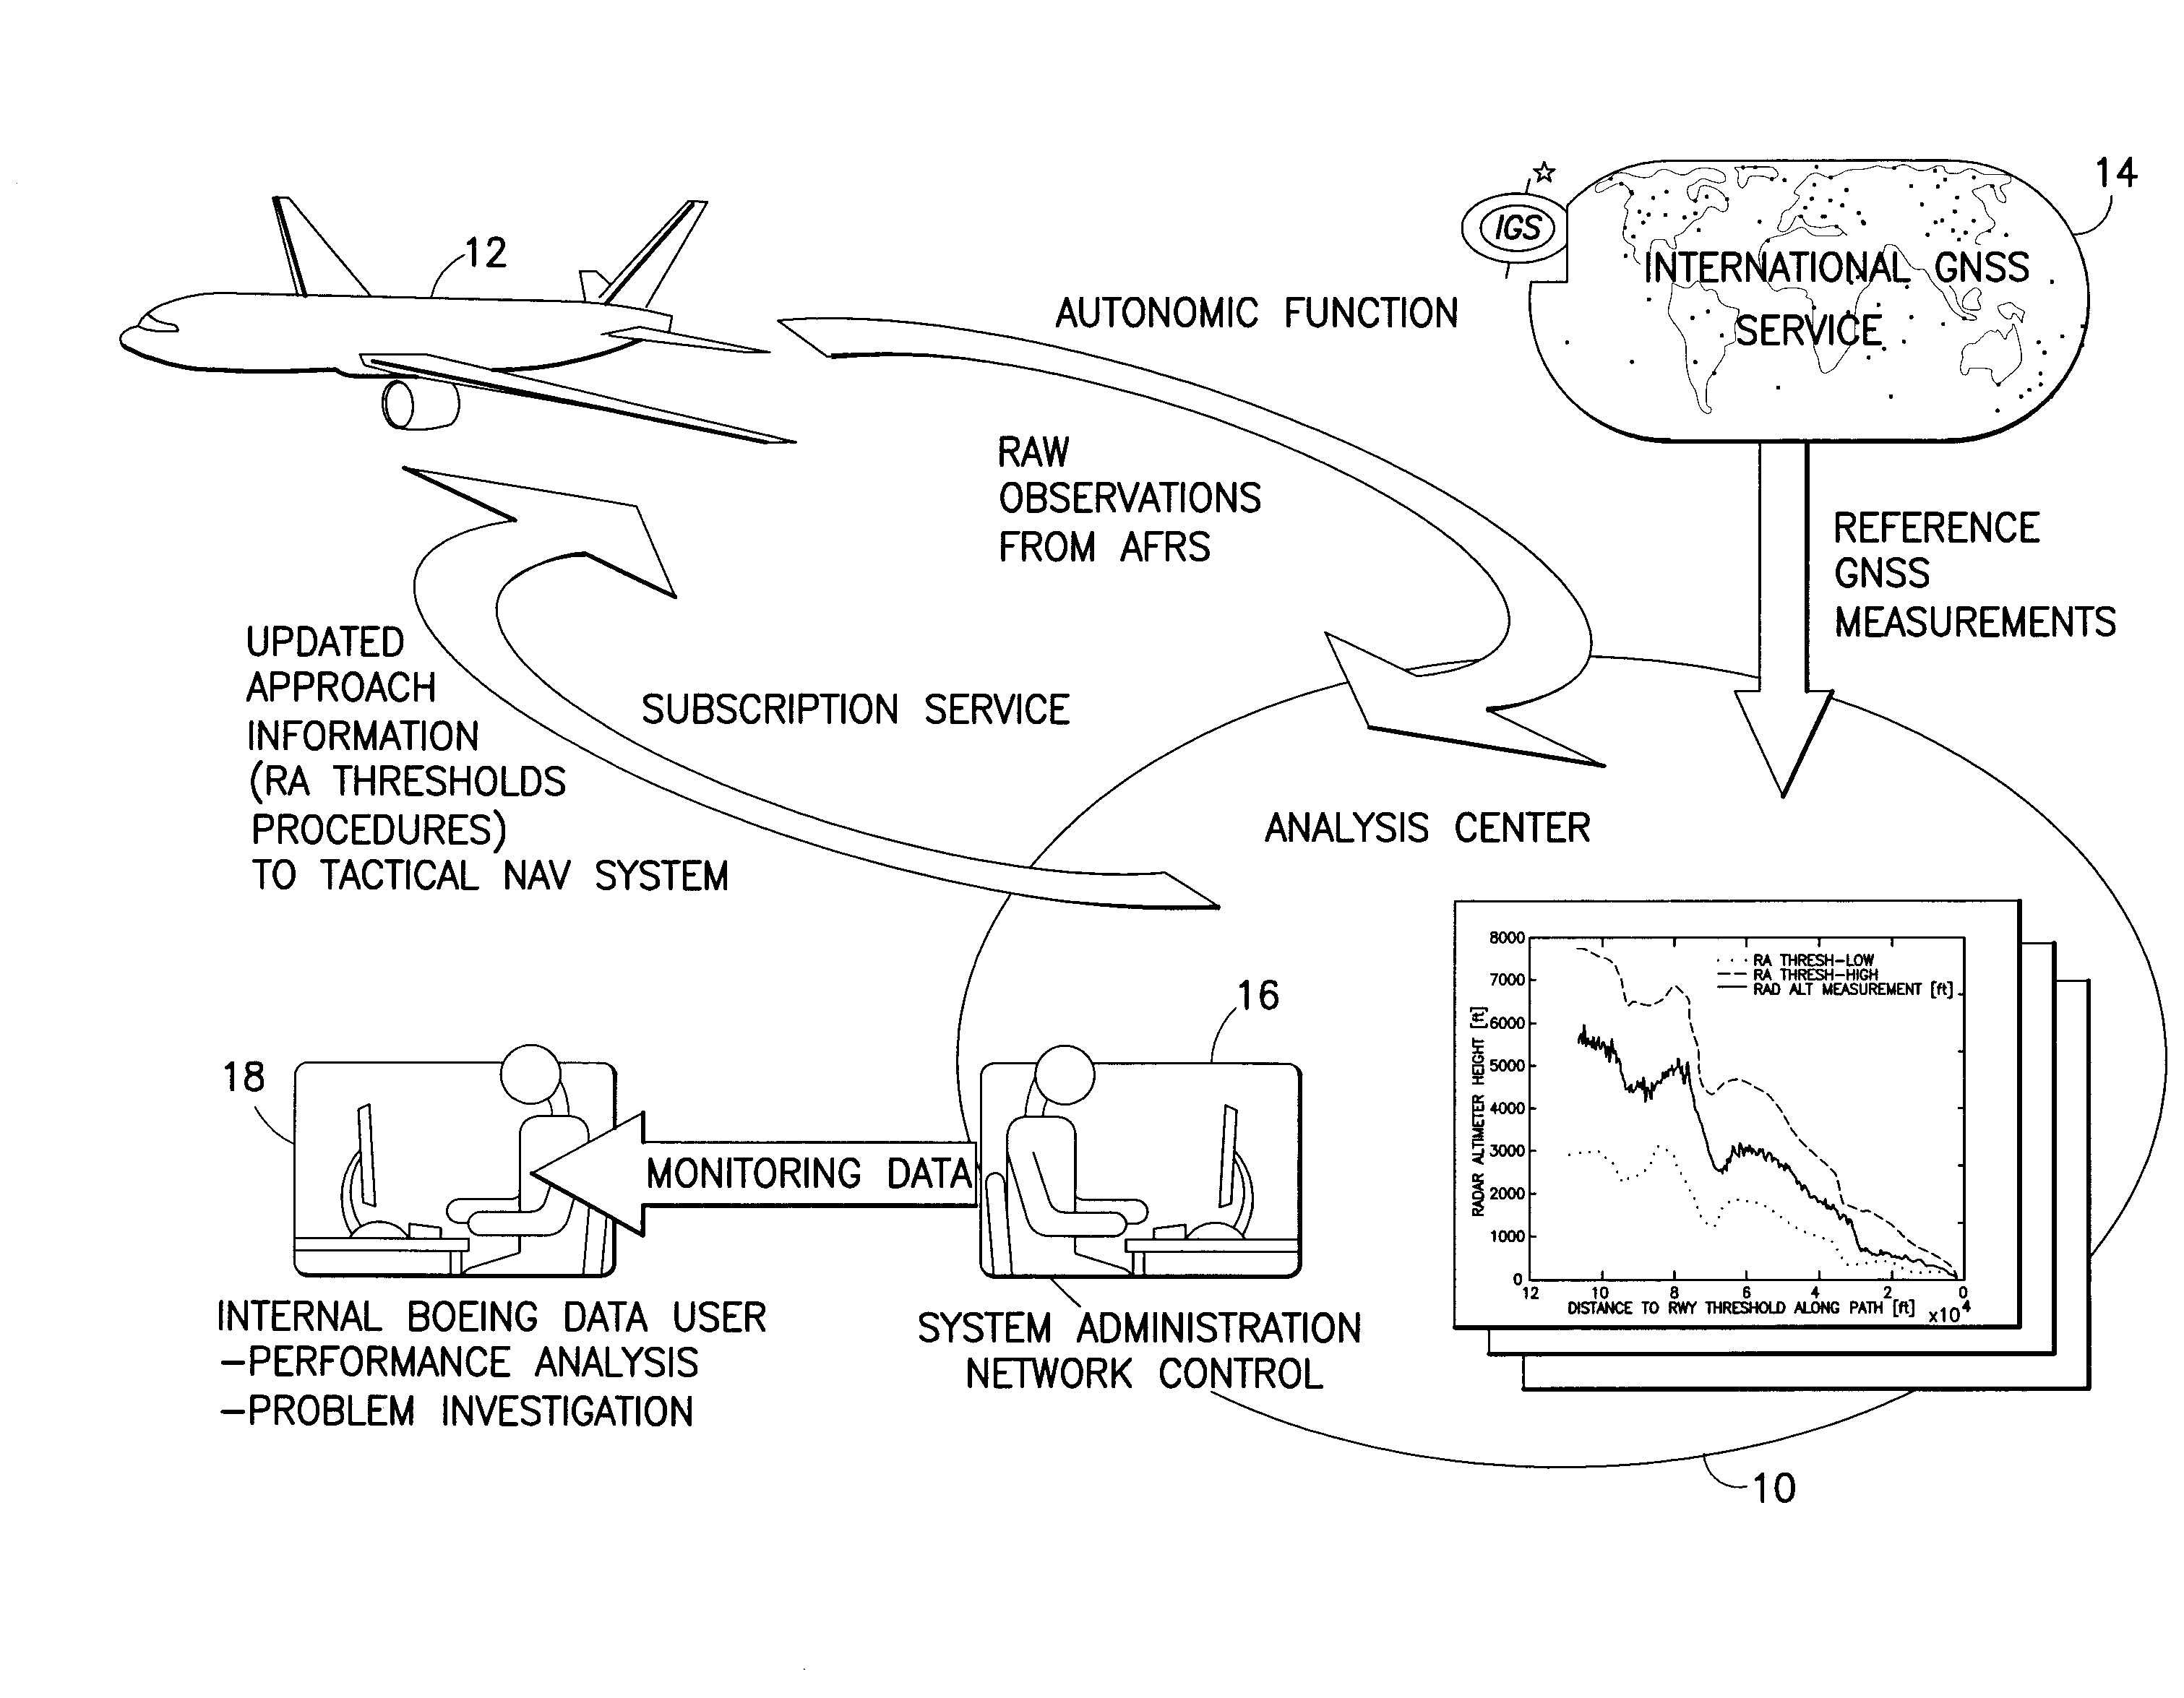 Vertical Required Navigation Performance Containment with Radio Altitude